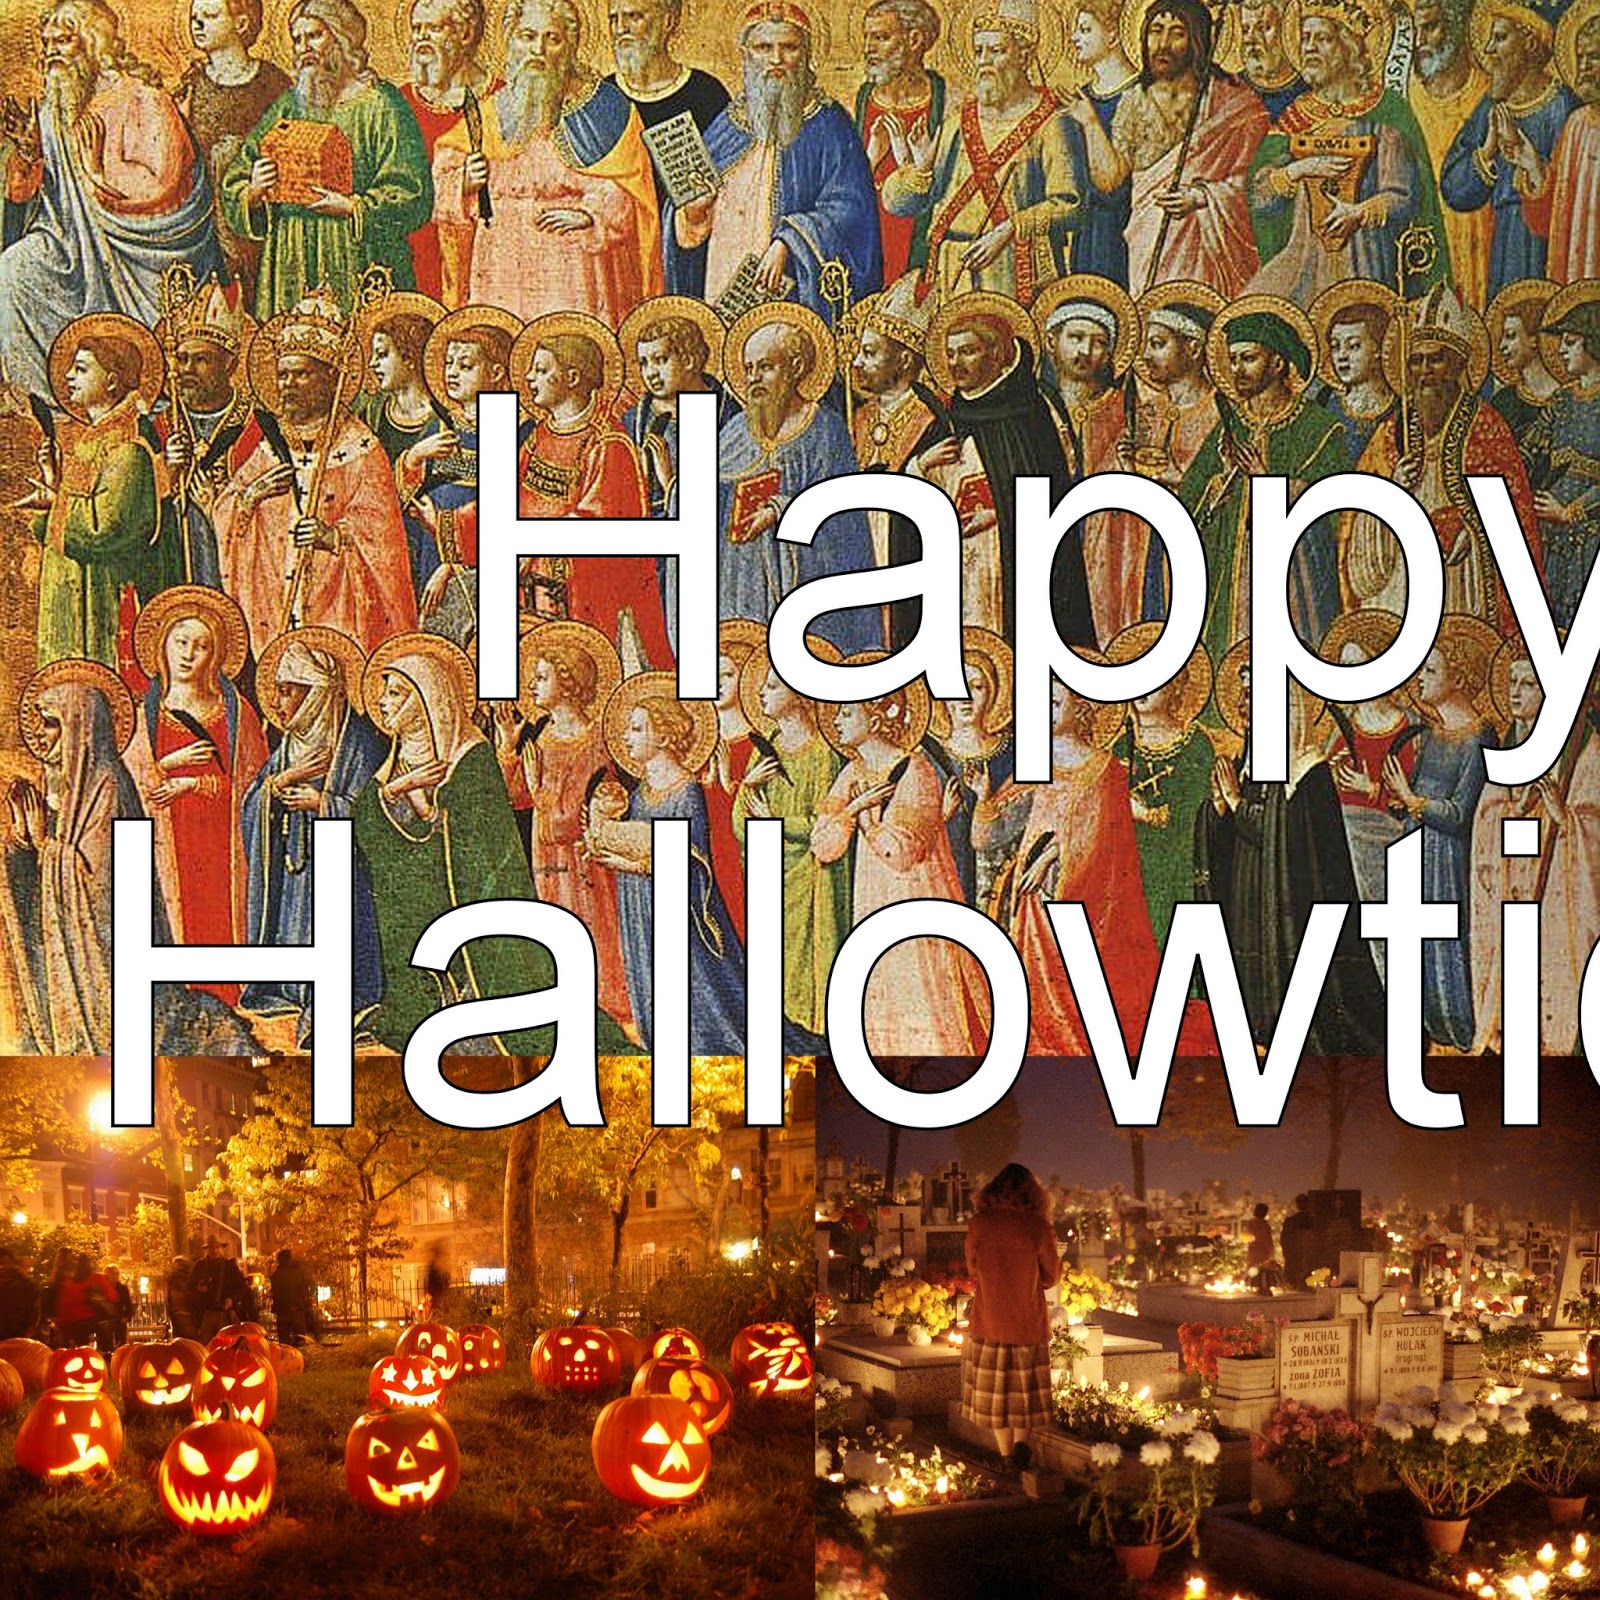 hallowtide-it-s-how-we-roll-all-saints-day-costumes-for-awesome